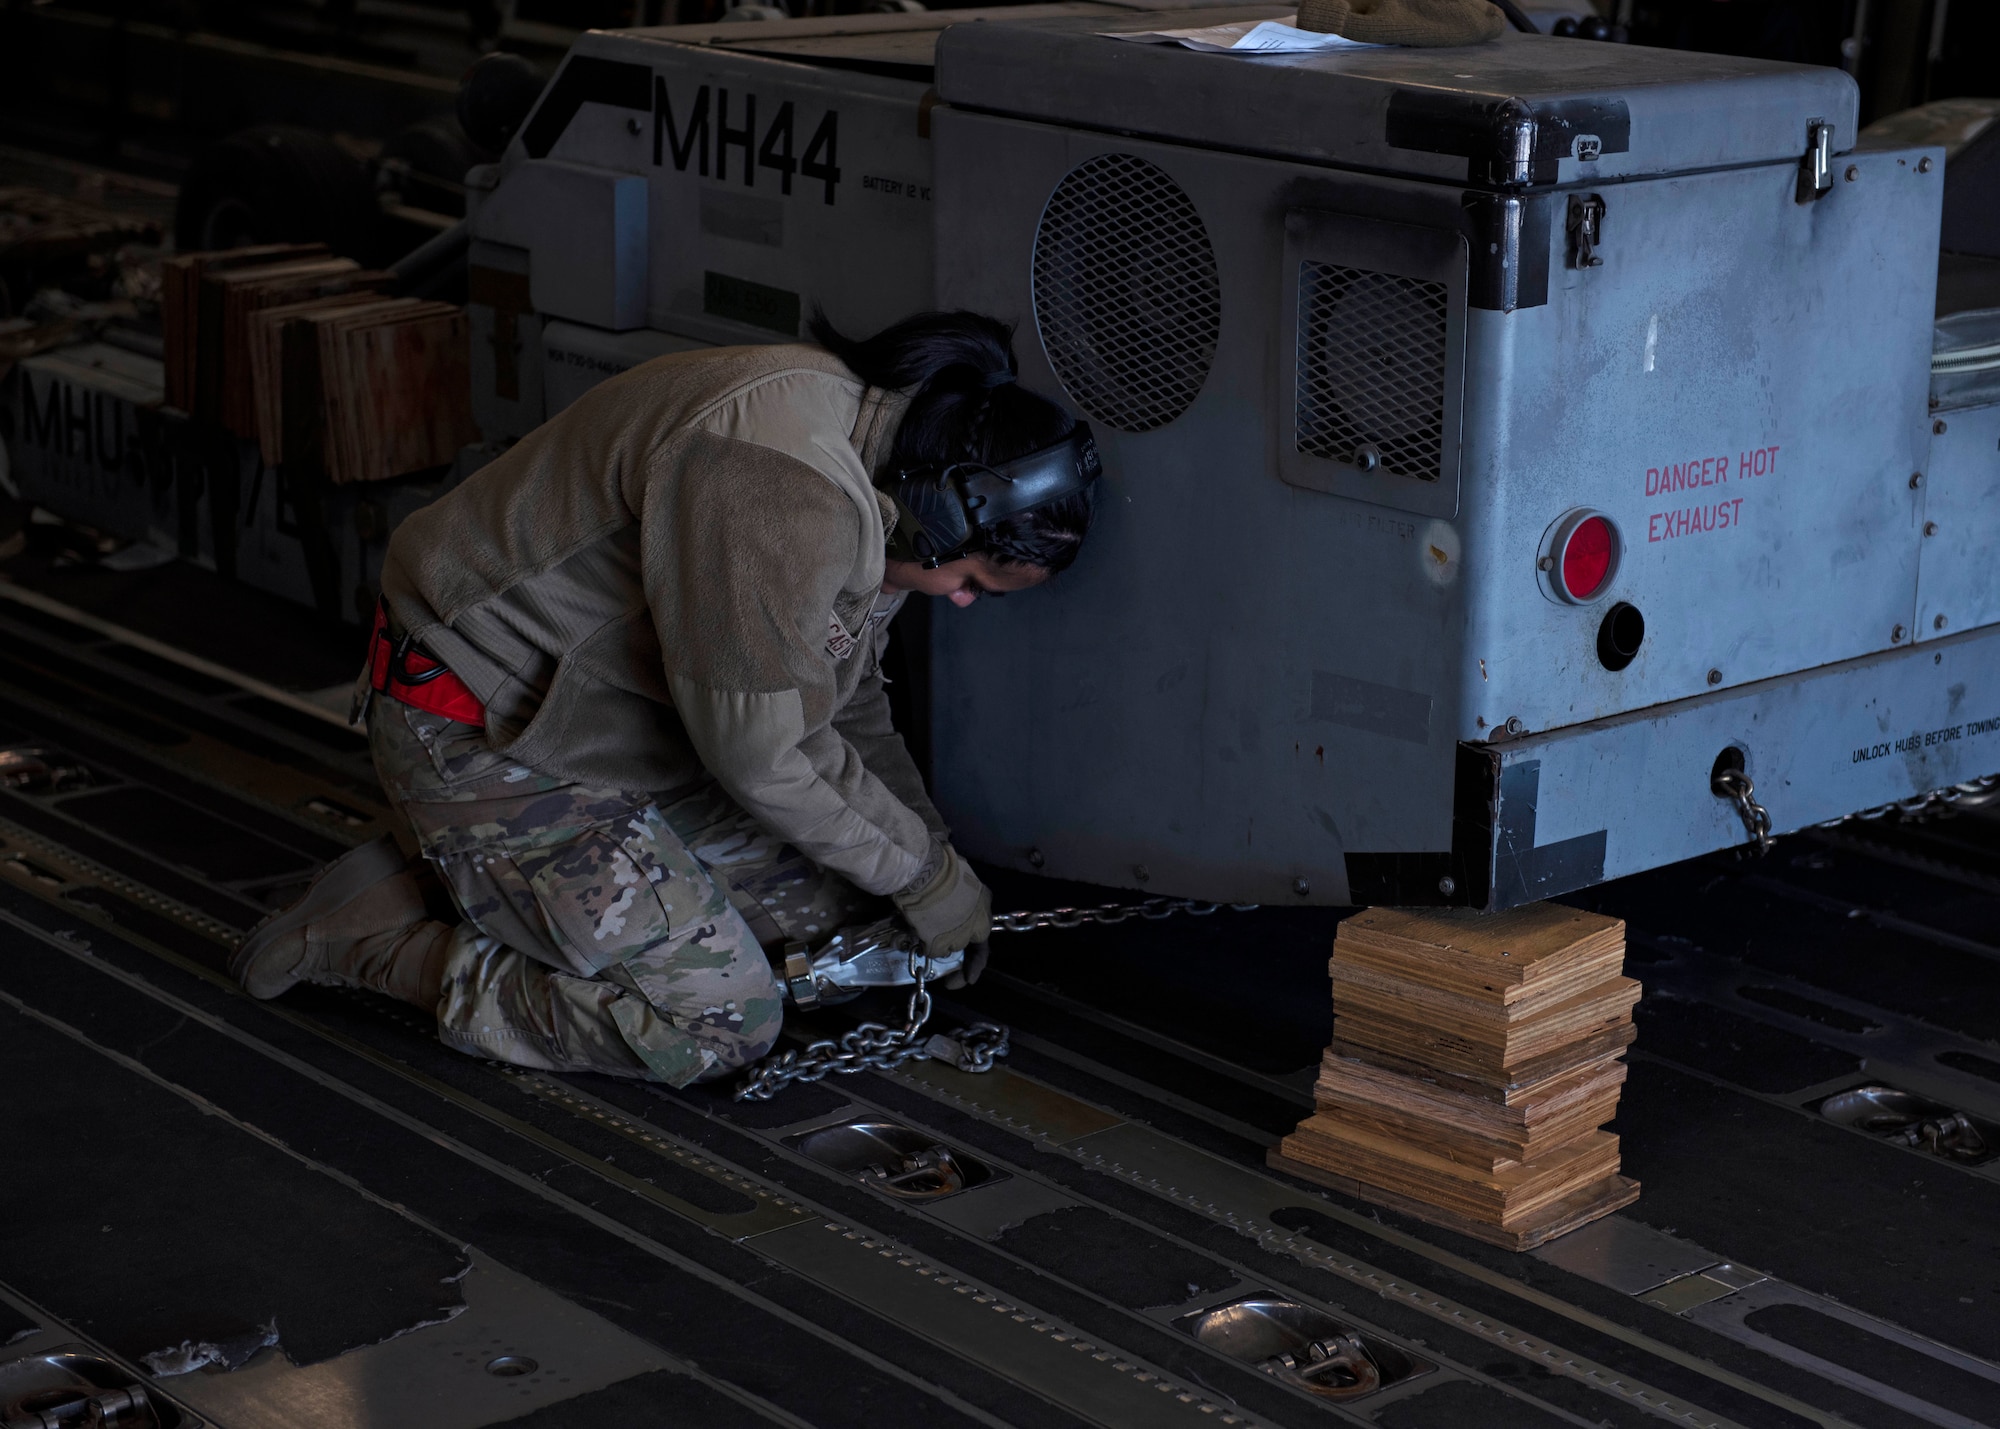 U.S. Air Force Airman 1st Class Martha Castaneda, air transportation specialist with the 62d Aerial Port Squadron, secures cargo in a C-17 Globemaster III aircraft during Exercise Rainier War 22B at Mountain Home Air Force Base, Idaho, Oct. 17, 2022. Rainier War 22B is a full-scale readiness exercise with an Air Force Generation prioritization; demonstrating the ability to generate, employ and sustain a combat force during a rigorous wartime scenario. (U.S. Air Force photo by Staff Sgt. Zoe Thacker)